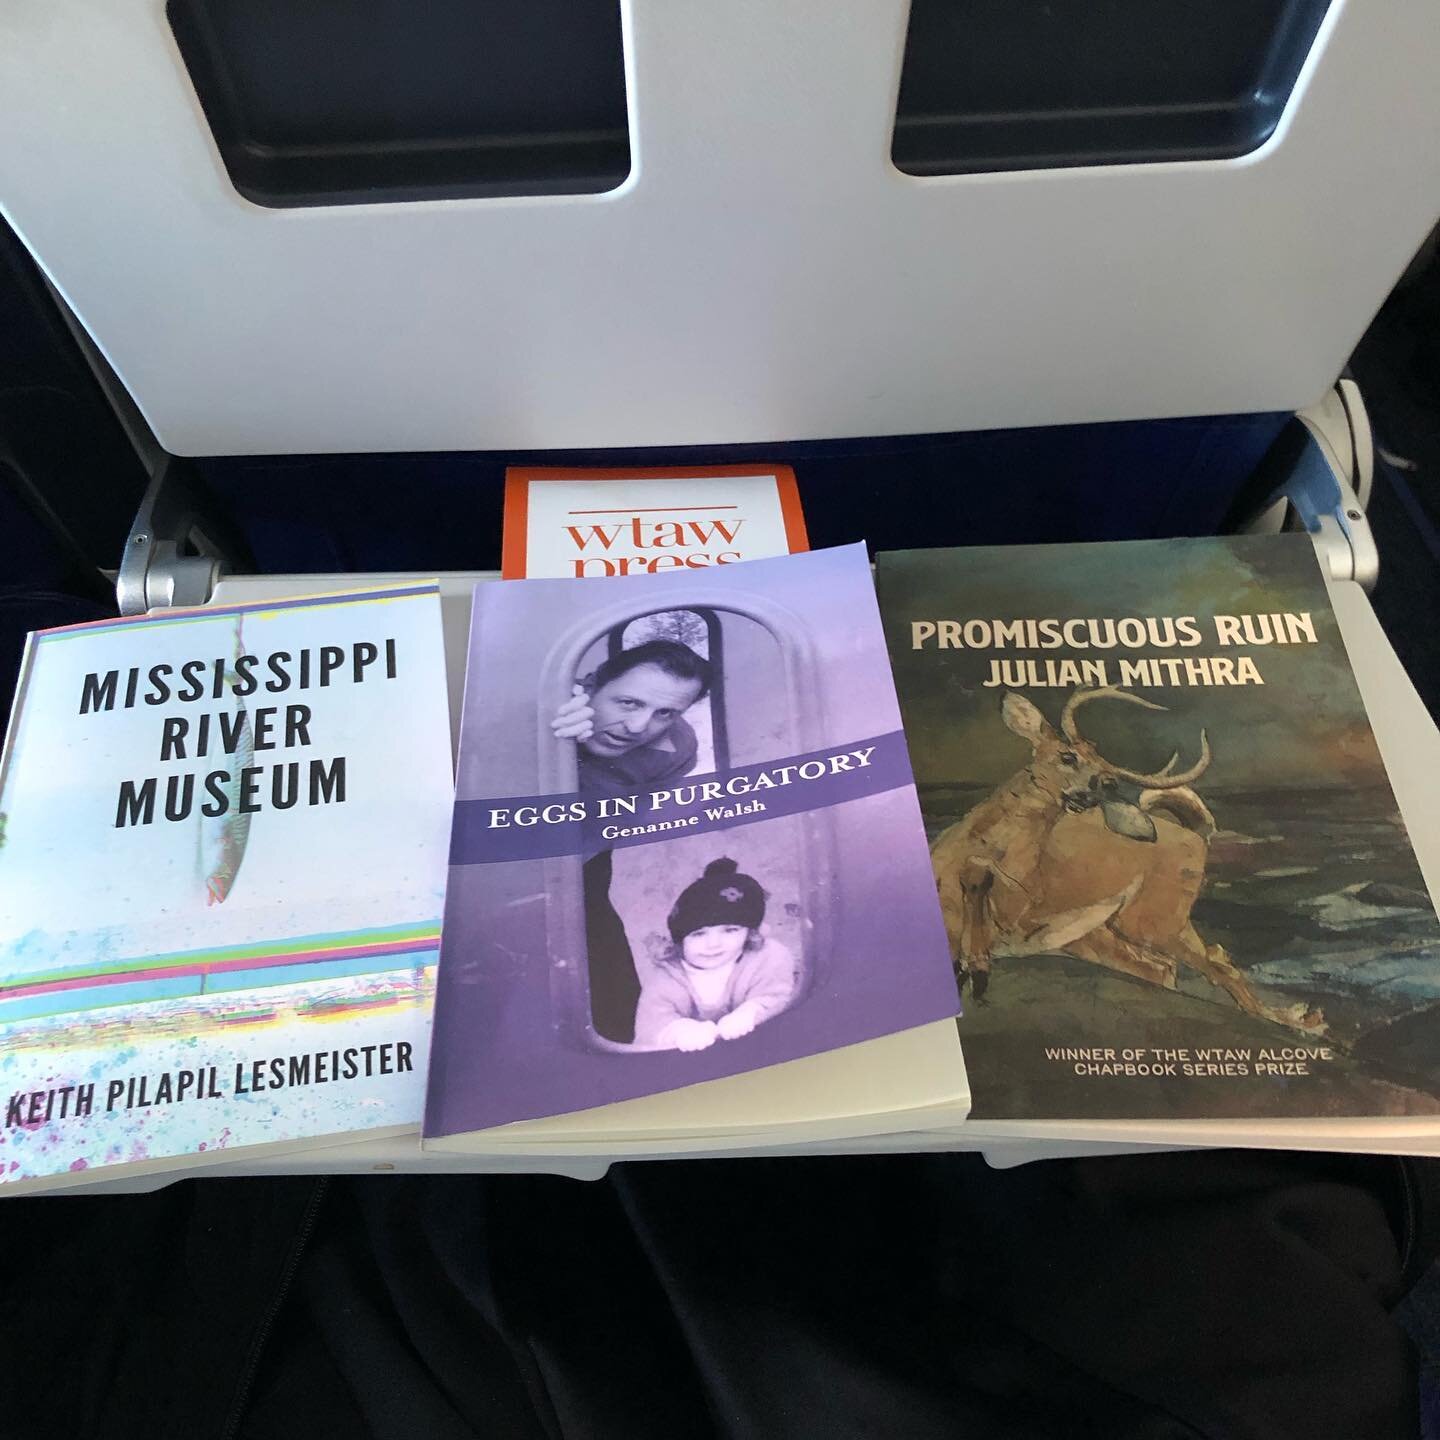 Gorgeous AWP, full of beautiful panels and readings, great conversations and meals with old and new friends, these splendid new books from @wtawpress for the trip home, and then not just my favorite movie of the year, but my favorite movie OF ALL TIM